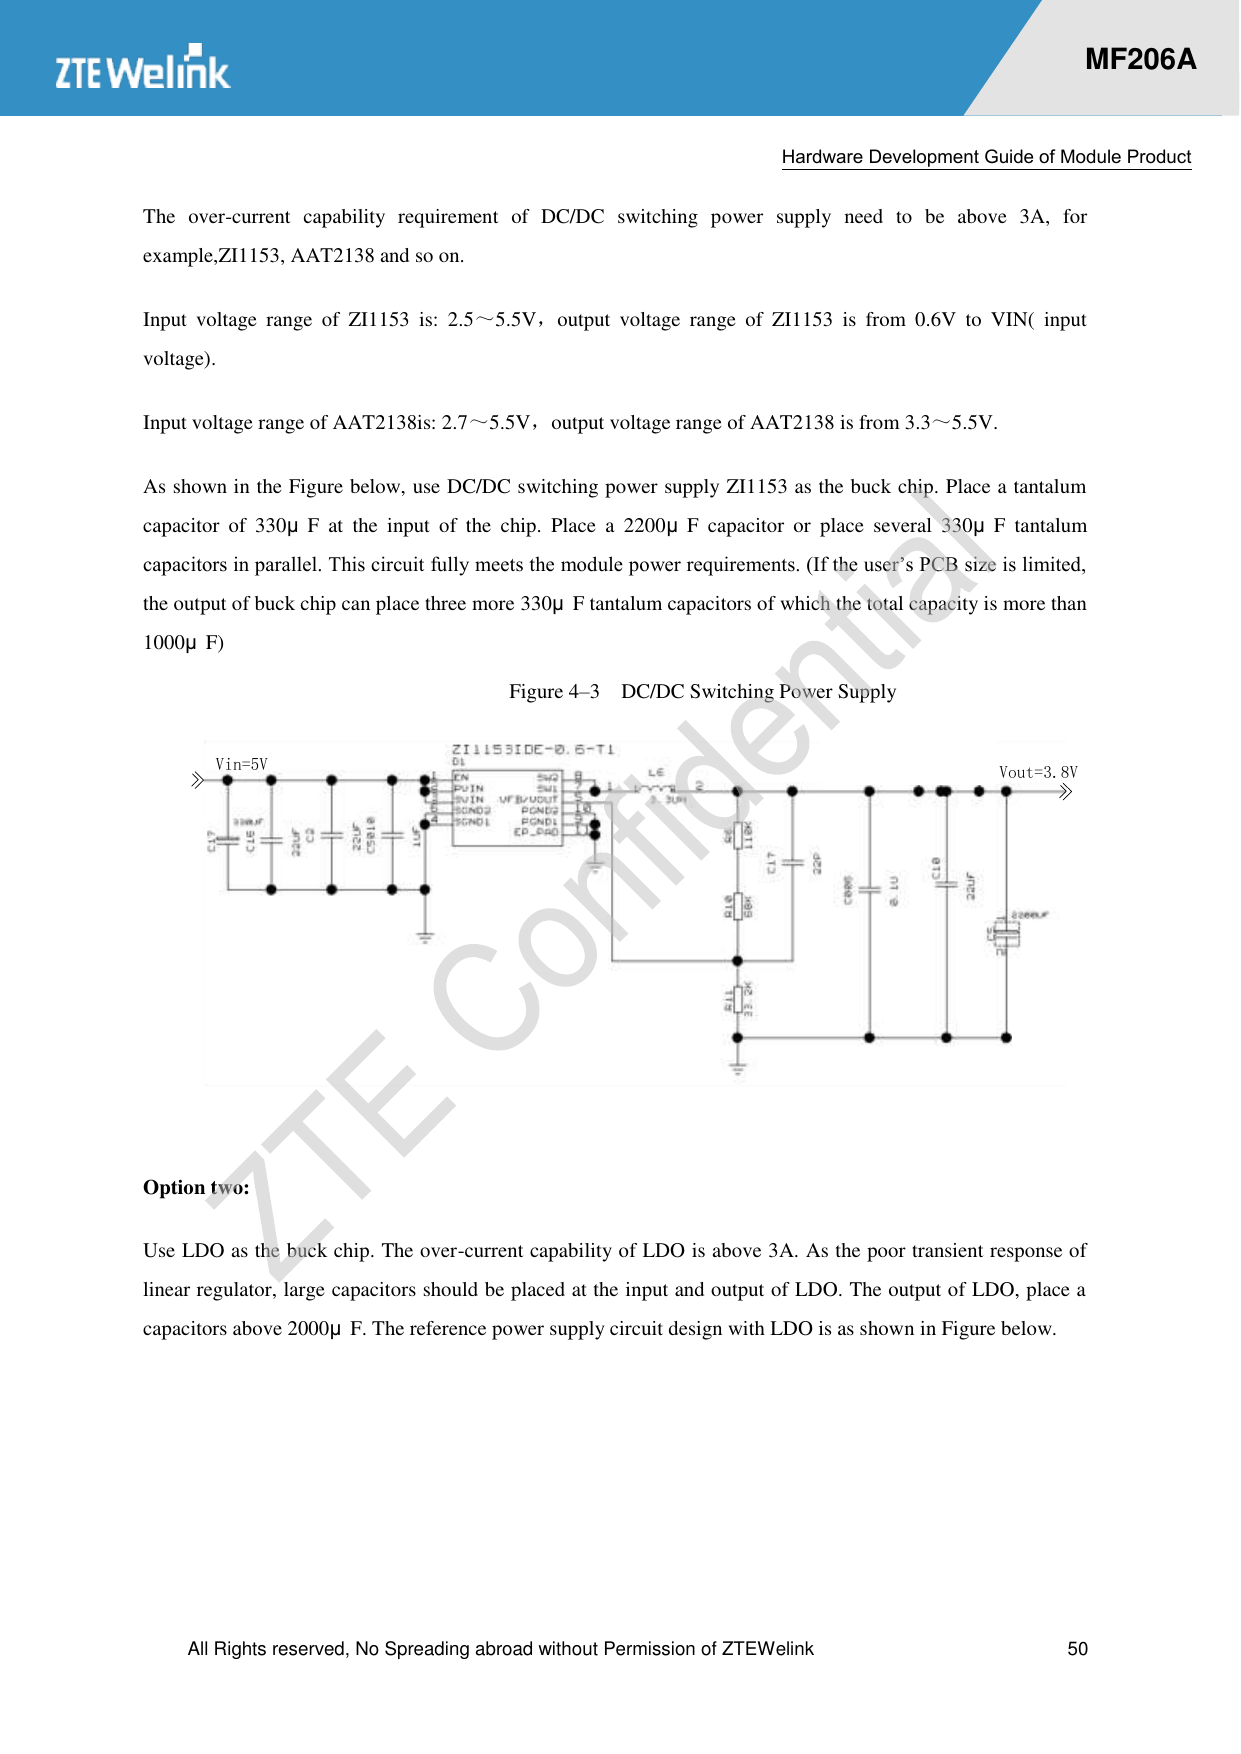  Hardware Development Guide of Module Product  All Rights reserved, No Spreading abroad without Permission of ZTEWelink  50    MF206A The  over-current  capability  requirement  of  DC/DC  switching  power  supply  need  to  be  above  3A,  for example,ZI1153, AAT2138 and so on. Input  voltage  range  of  ZI1153  is:  2.5～5.5V，output  voltage  range  of  ZI1153  is  from  0.6V  to  VIN(  input voltage). Input voltage range of AAT2138is: 2.7～5.5V，output voltage range of AAT2138 is from 3.3～5.5V. As shown in the Figure below, use DC/DC switching power supply ZI1153 as the buck chip. Place a tantalum capacitor  of  330μF  at  the  input  of  the  chip.  Place  a  2200μF  capacitor  or  place  several  330μF  tantalum capacitors in parallel. This circuit fully meets the module power requirements. (If the user’s PCB size is limited, the output of buck chip can place three more 330μF tantalum capacitors of which the total capacity is more than 1000μF) Figure 4–3  DC/DC Switching Power Supply Vin=5V Vout=3.8V Option two:   Use LDO as the buck chip. The over-current capability of LDO is above 3A. As the poor transient response of linear regulator, large capacitors should be placed at the input and output of LDO. The output of LDO, place a capacitors above 2000μF. The reference power supply circuit design with LDO is as shown in Figure below. 